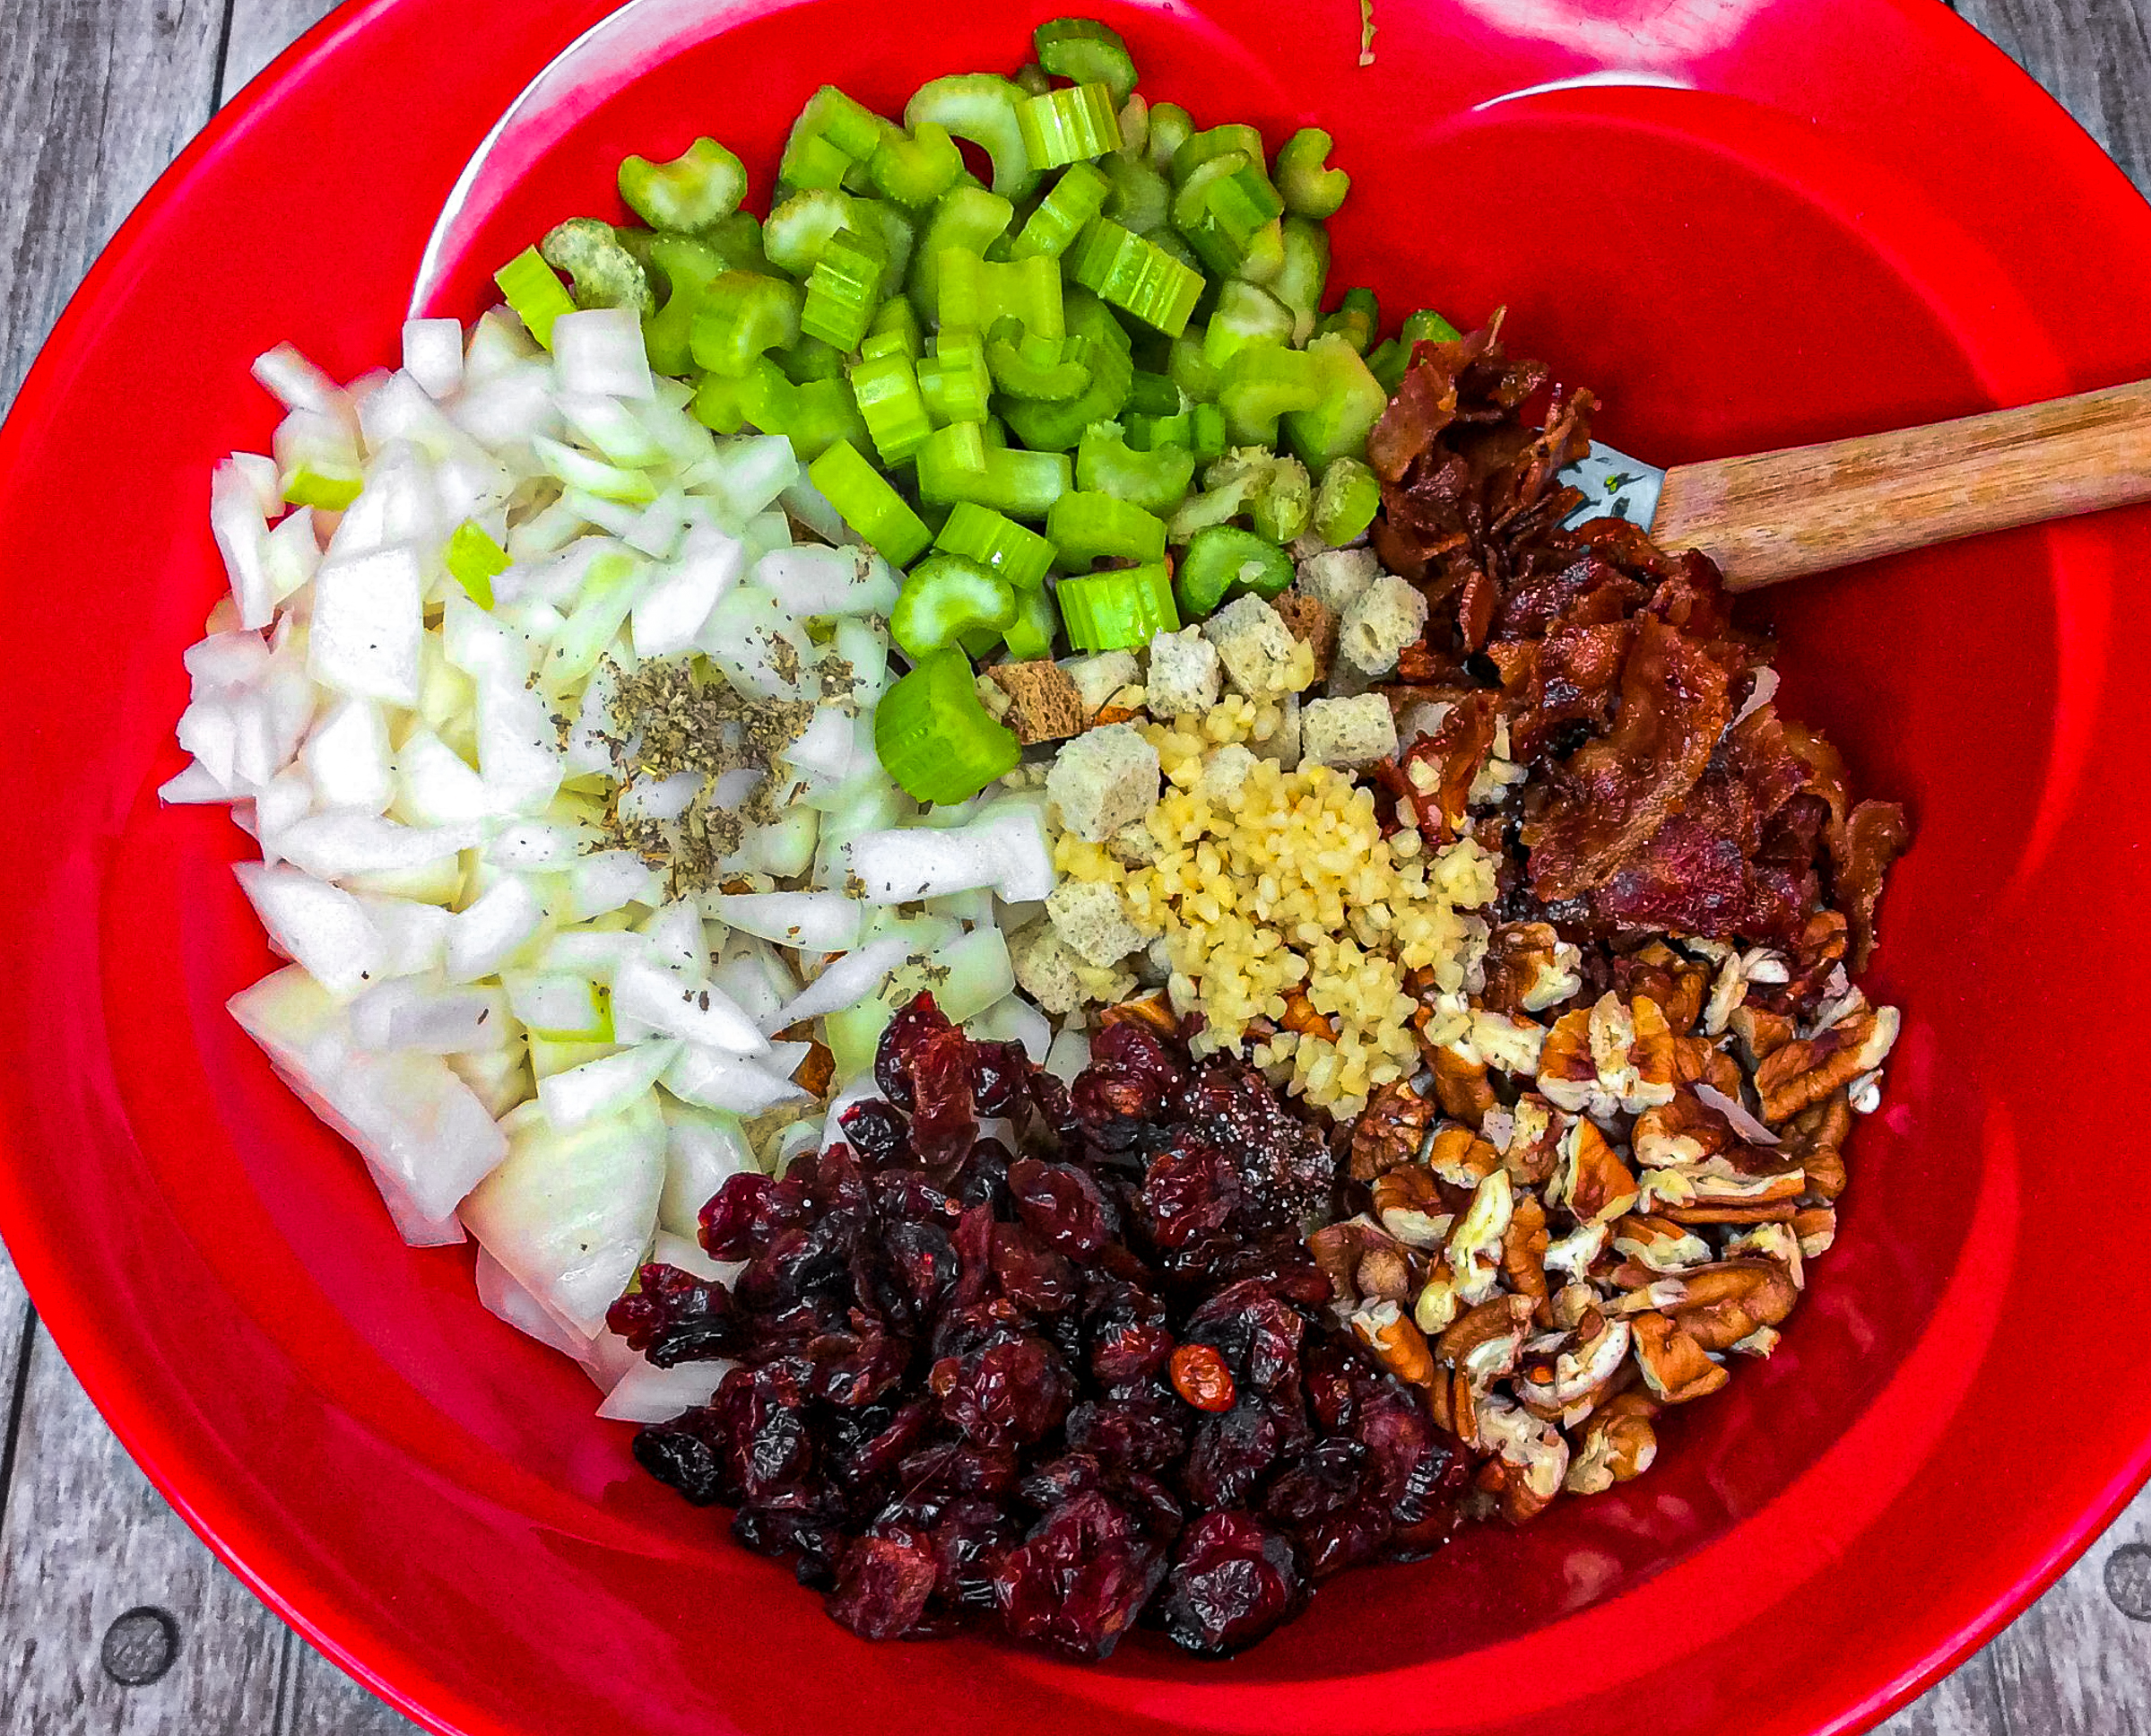 Chop up the celery, onion, cranberries, and pecans.